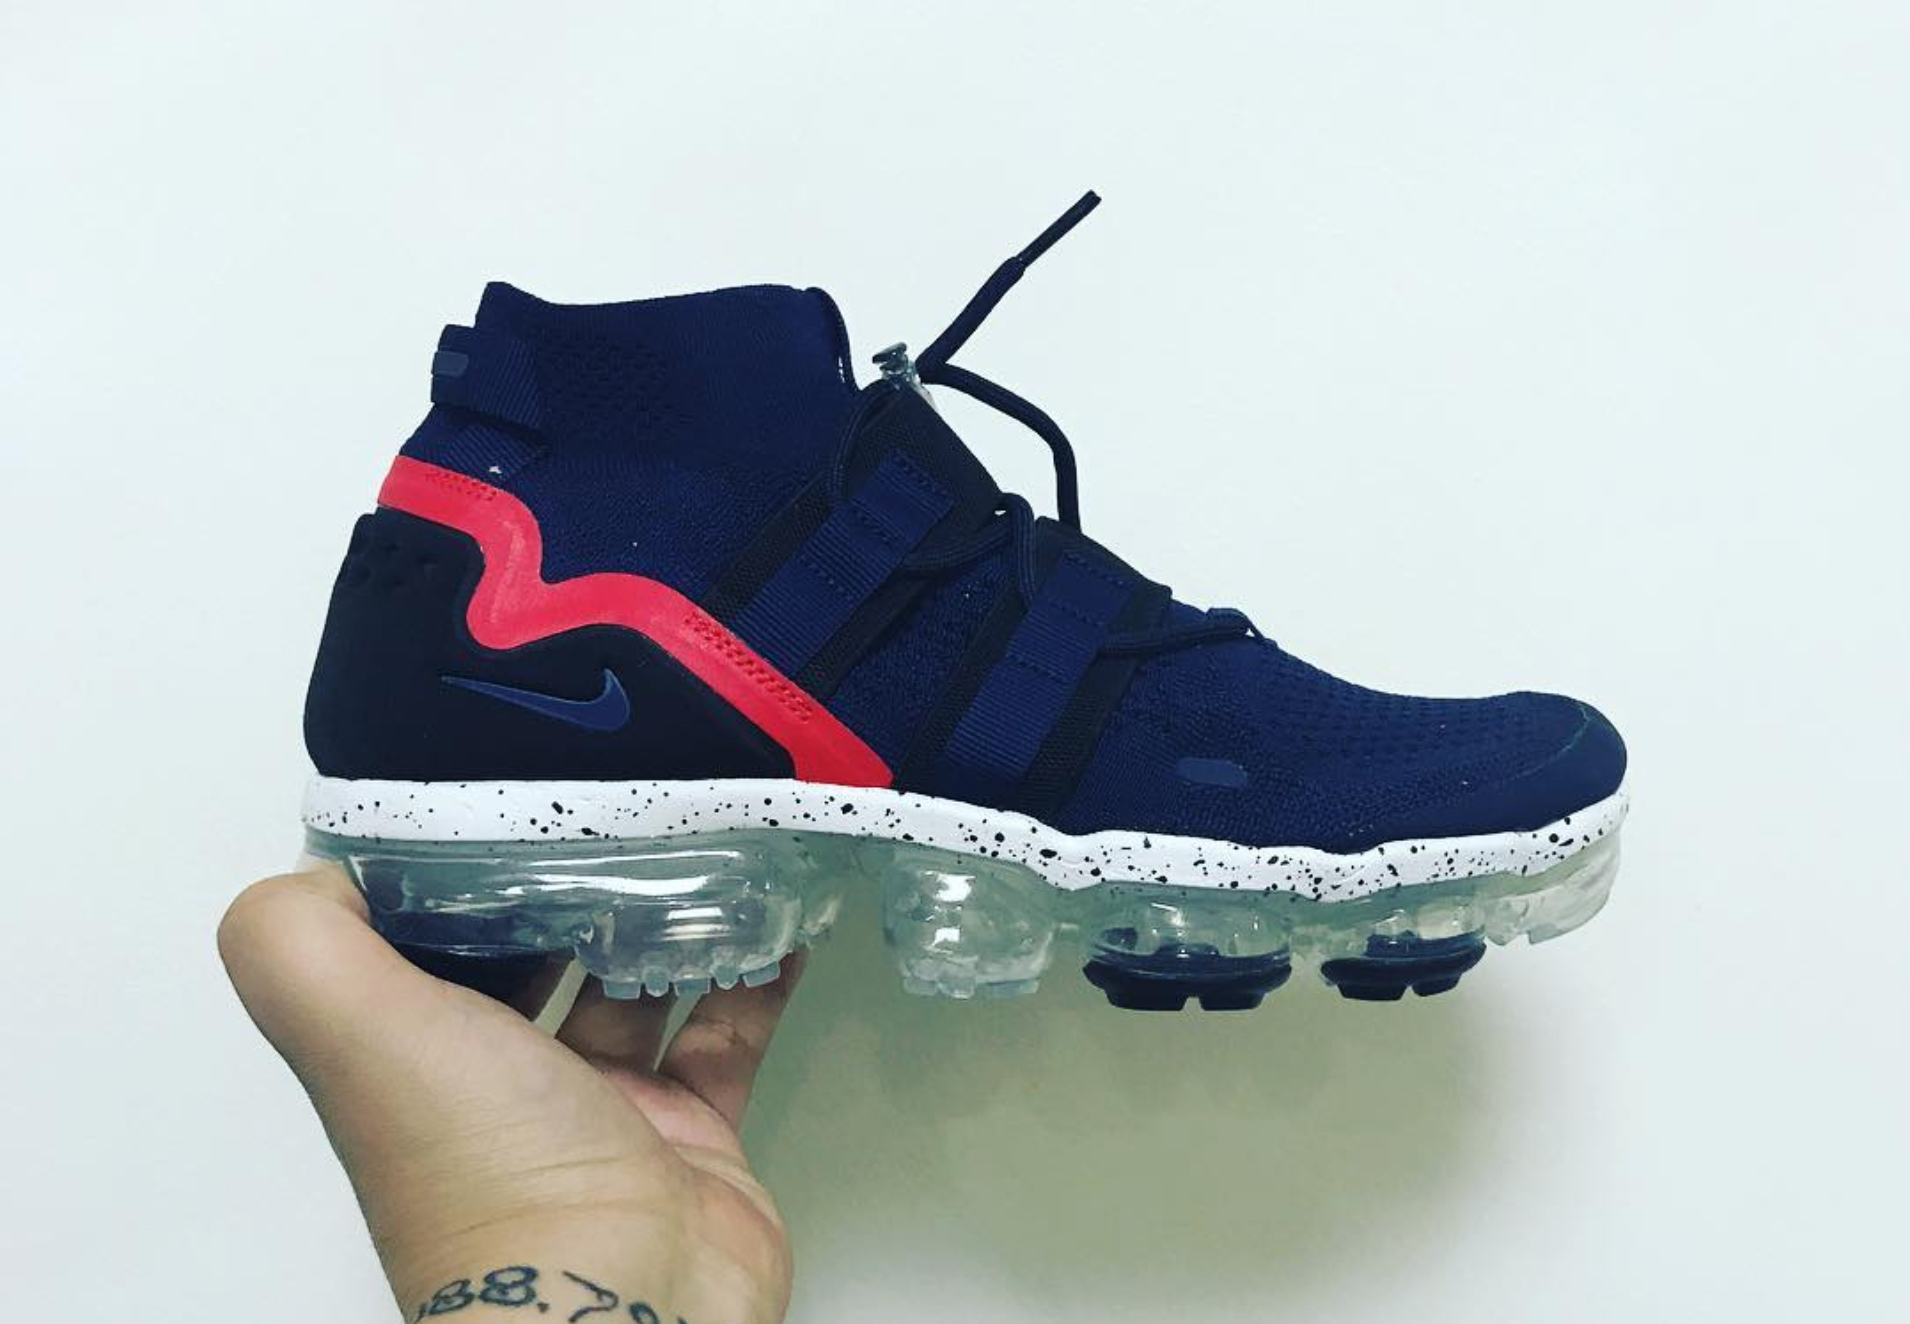 Colorway of the Nike VaporMax Mid ATR 